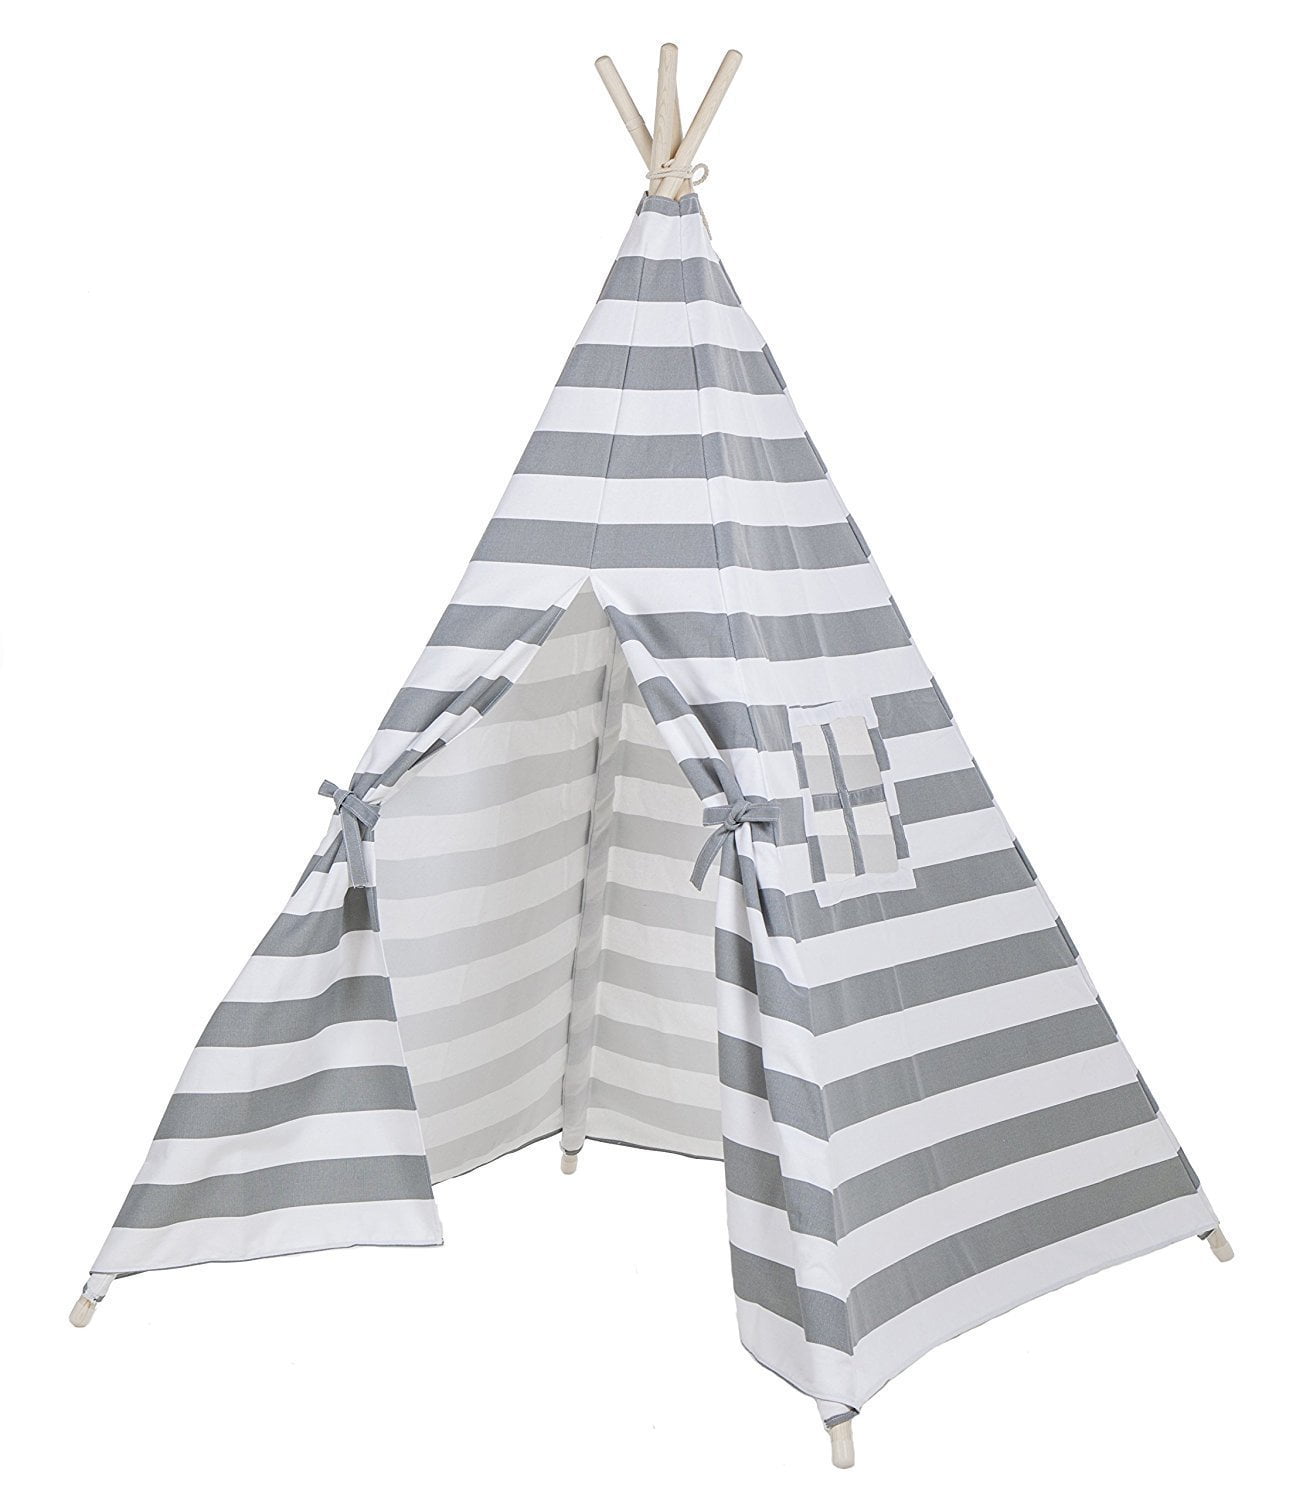 EJOY e-Joy 6 Indoor Indian Playhouse Toy Teepee Play Tent for Kids Toddlers Canvas Teepee with Carry Case with Mat White 